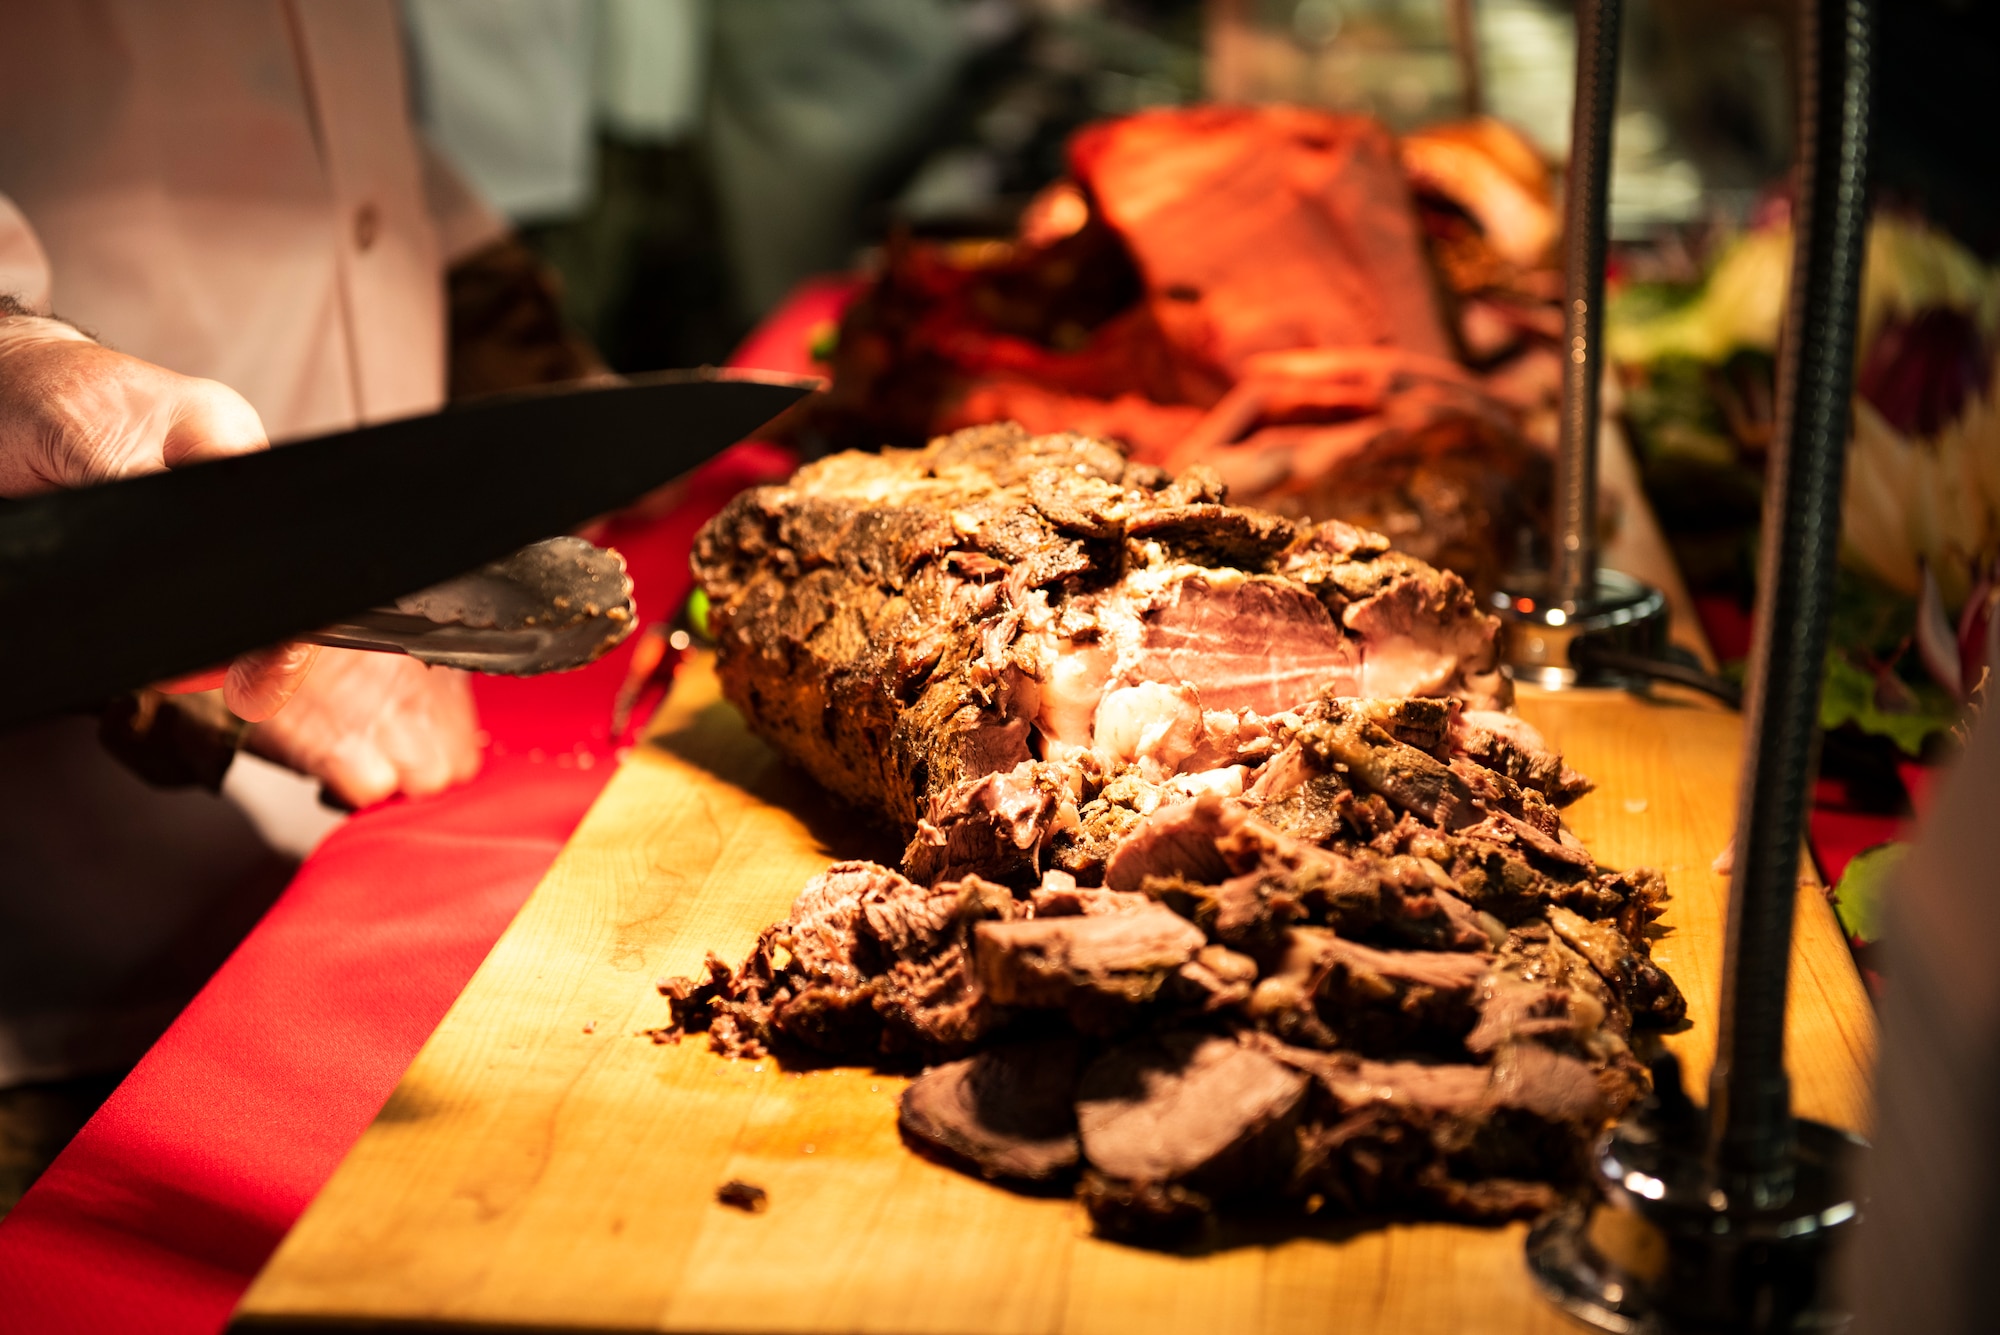 A slab of roast beef is carved at the 325th Force Support Squadron holiday meal at Tyndall Air Force Base, Florida, Nov. 28, 2019. Meal attendees were served by commanders, chiefs, first sergeants, and special guests of the 325th Fighter Wing. (U.S. Air Force photo by Staff Sgt. Magen M. Reeves)